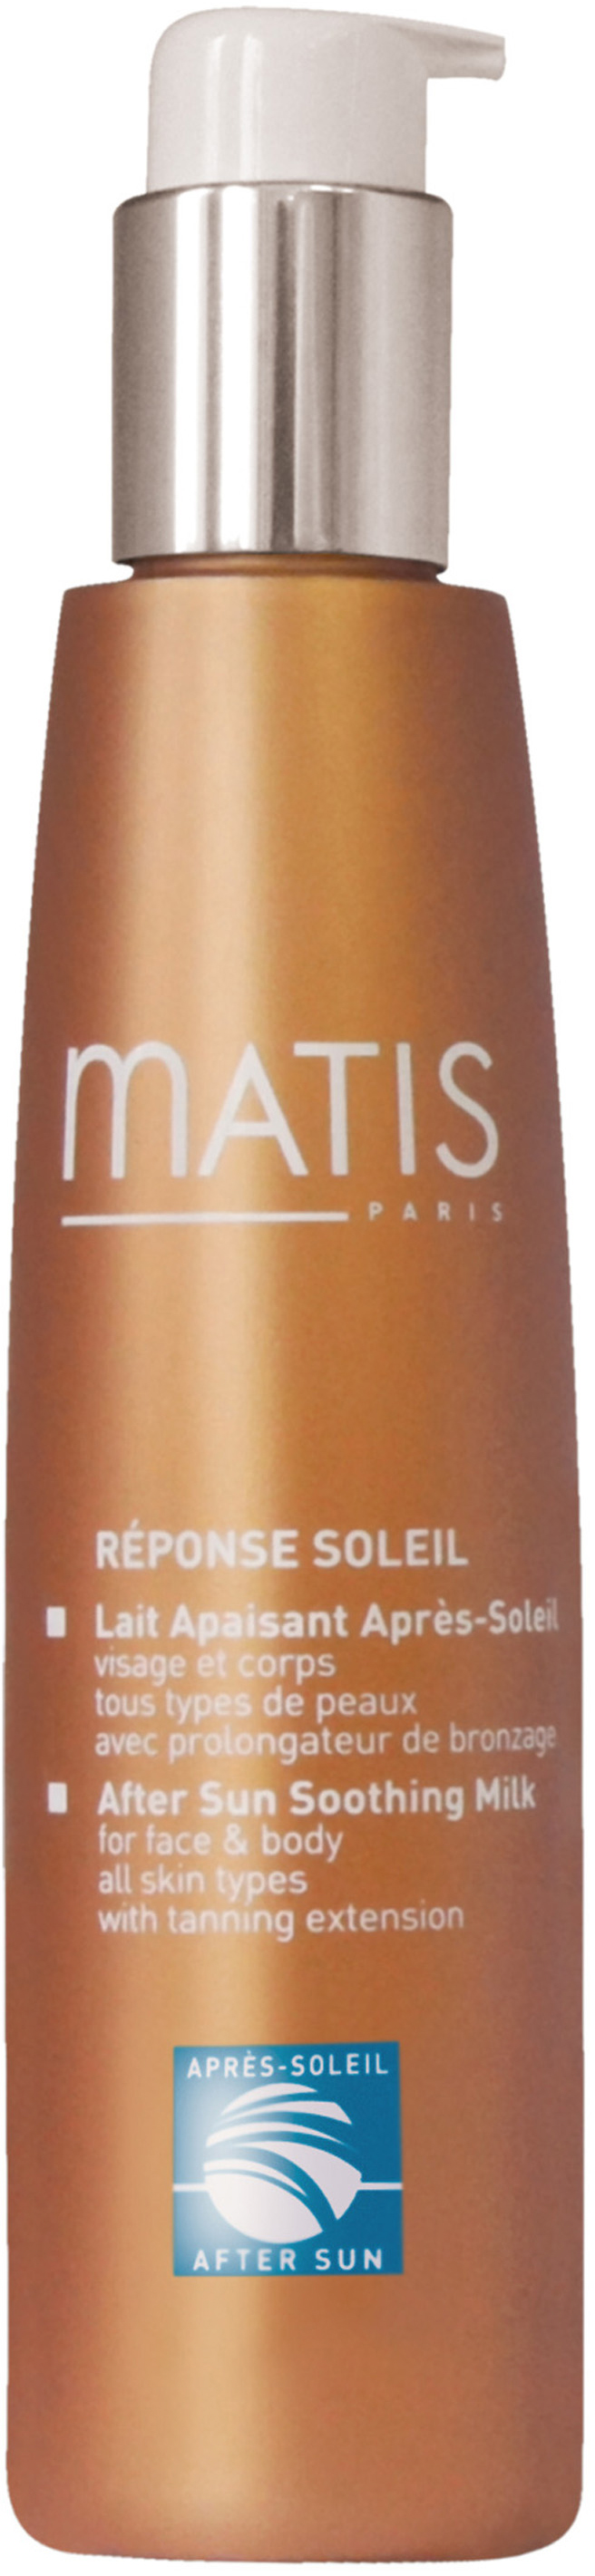 Matis After-Sun Soothing Milk Face & Body